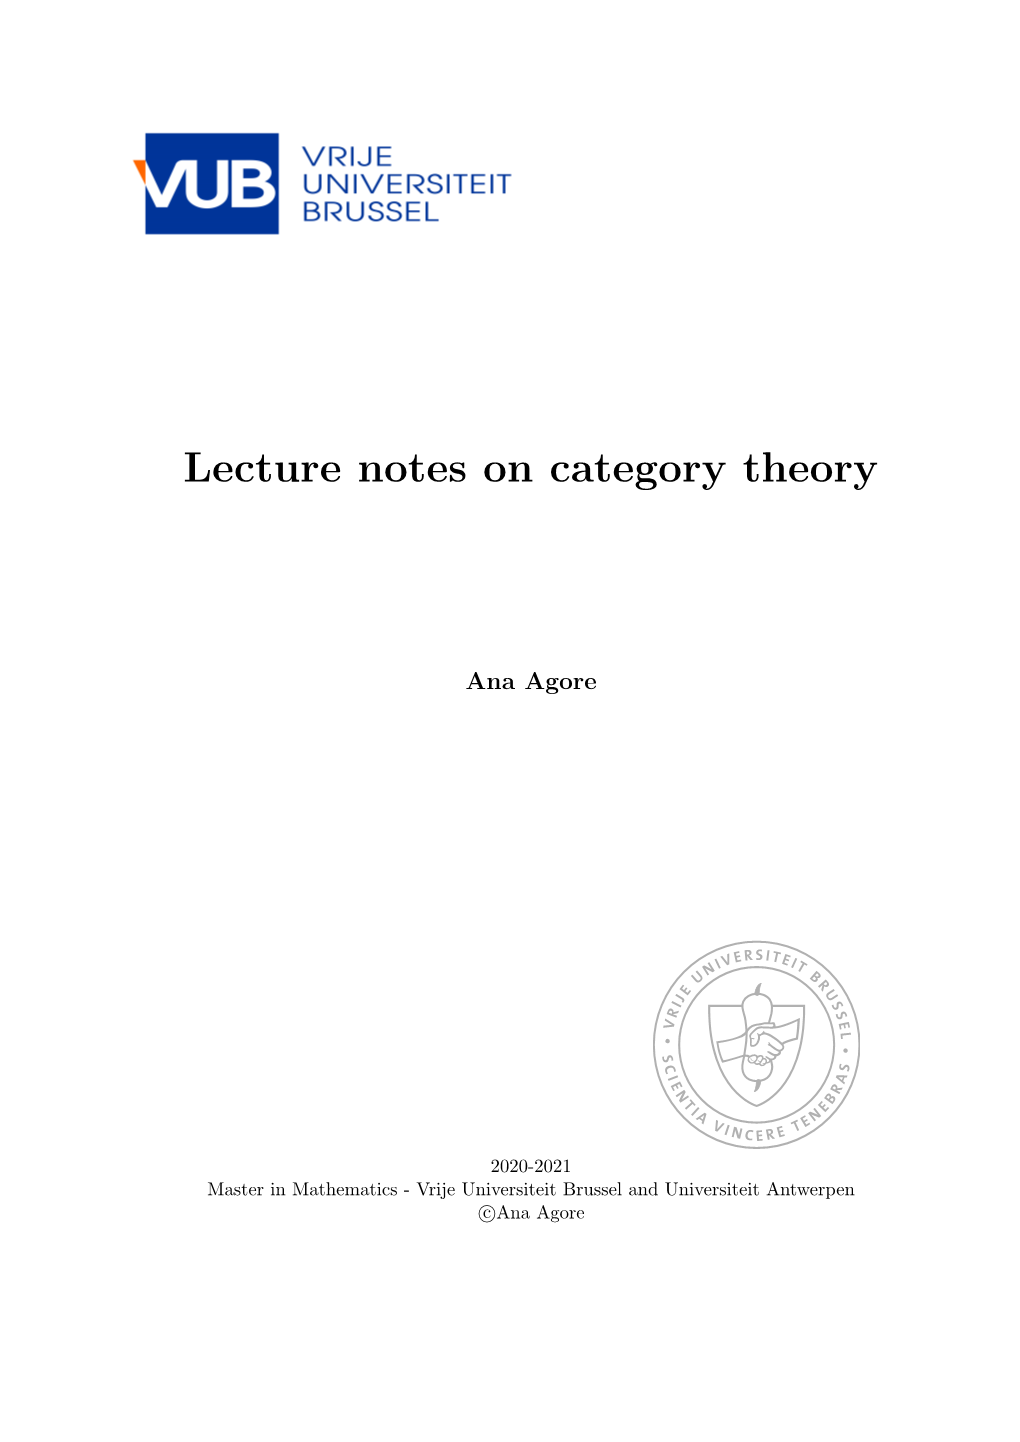 Lecture Notes on Category Theory